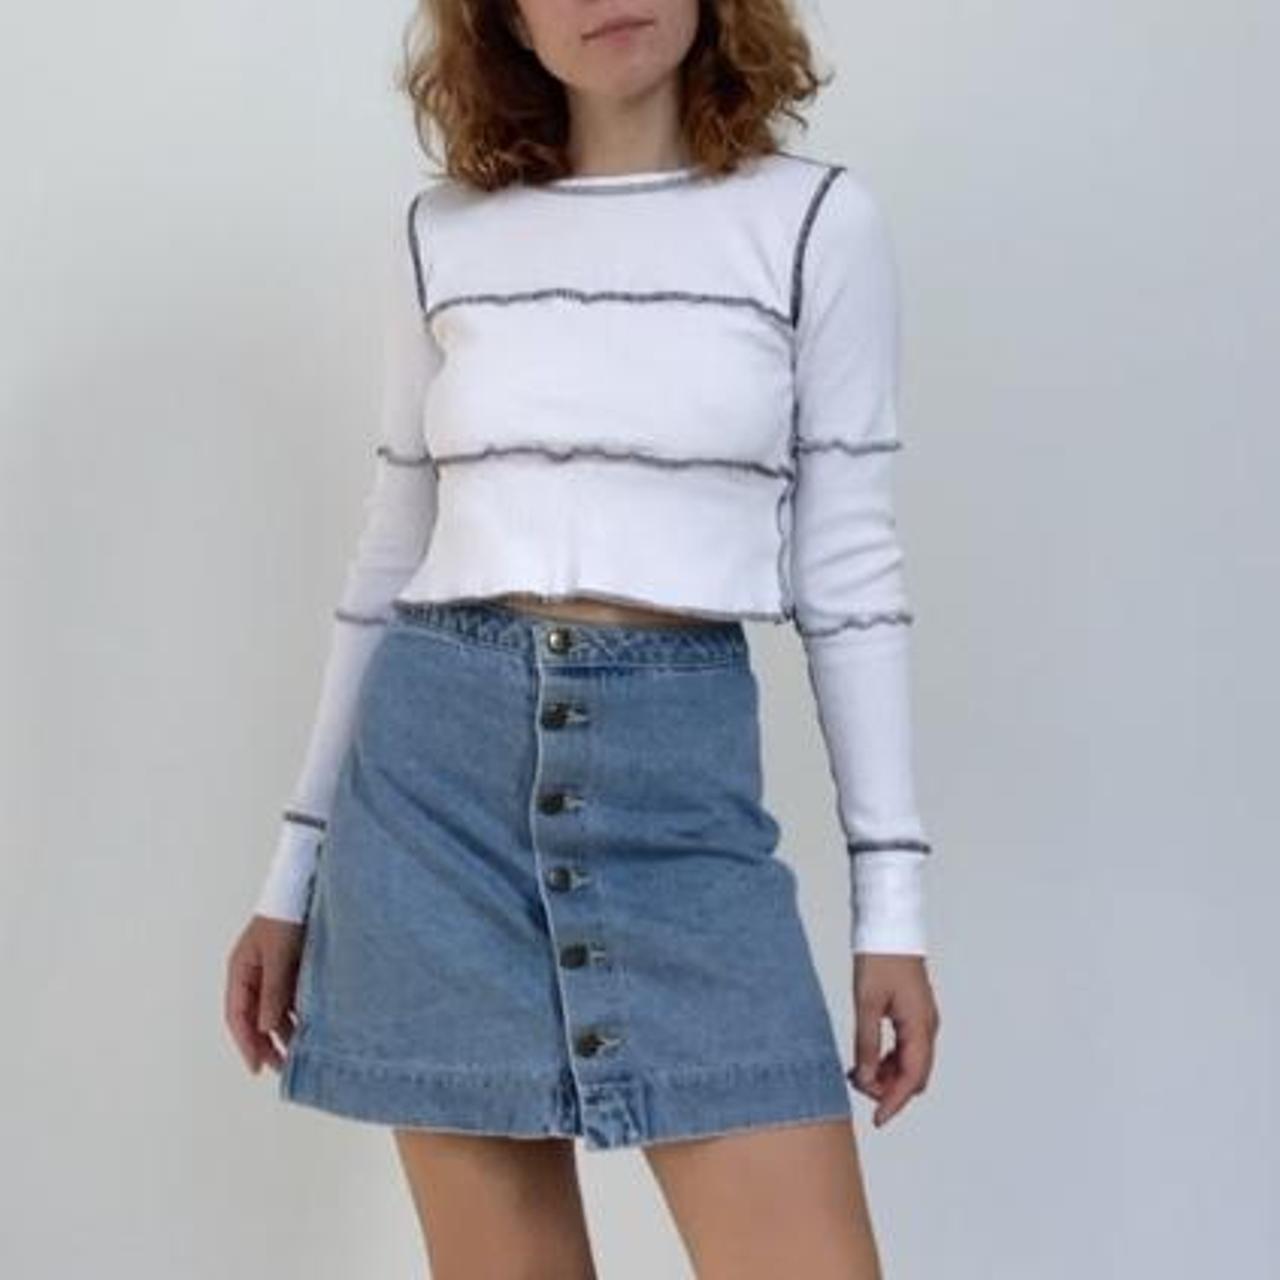 Product Image 1 - American apparel jeans mini skirt.